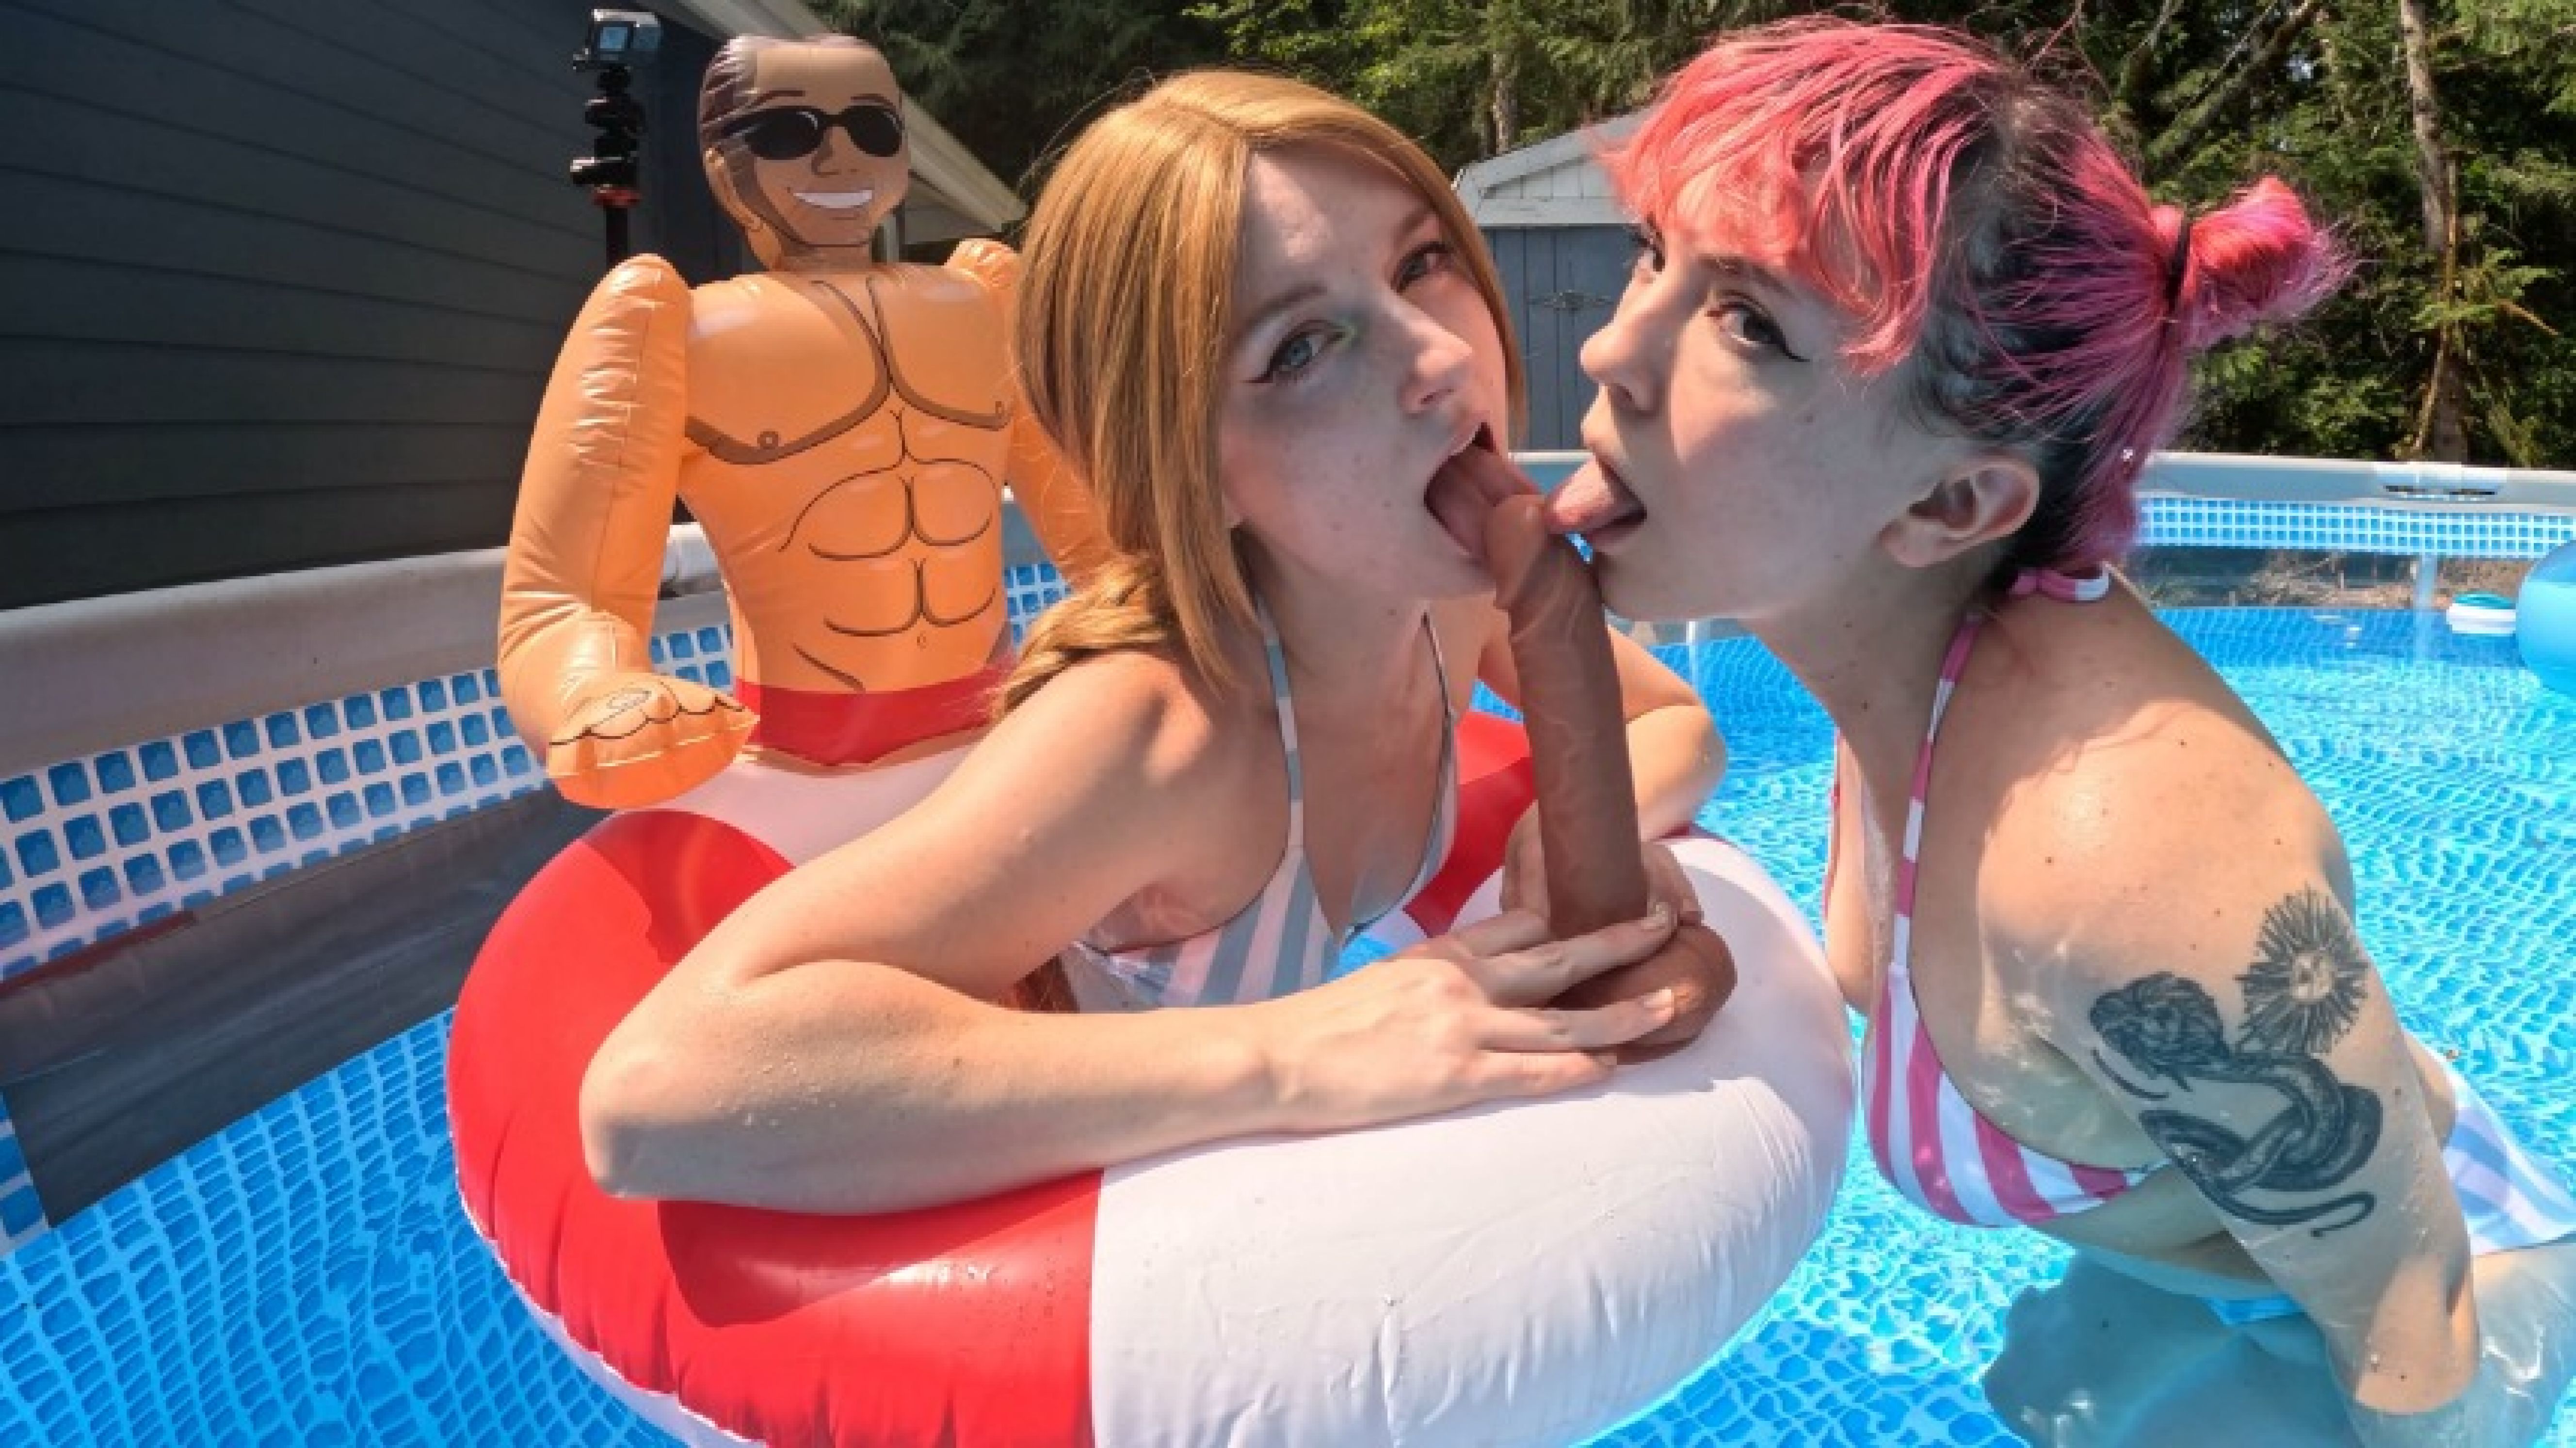 leaked pool float gg bj with destinationkat thumbnail